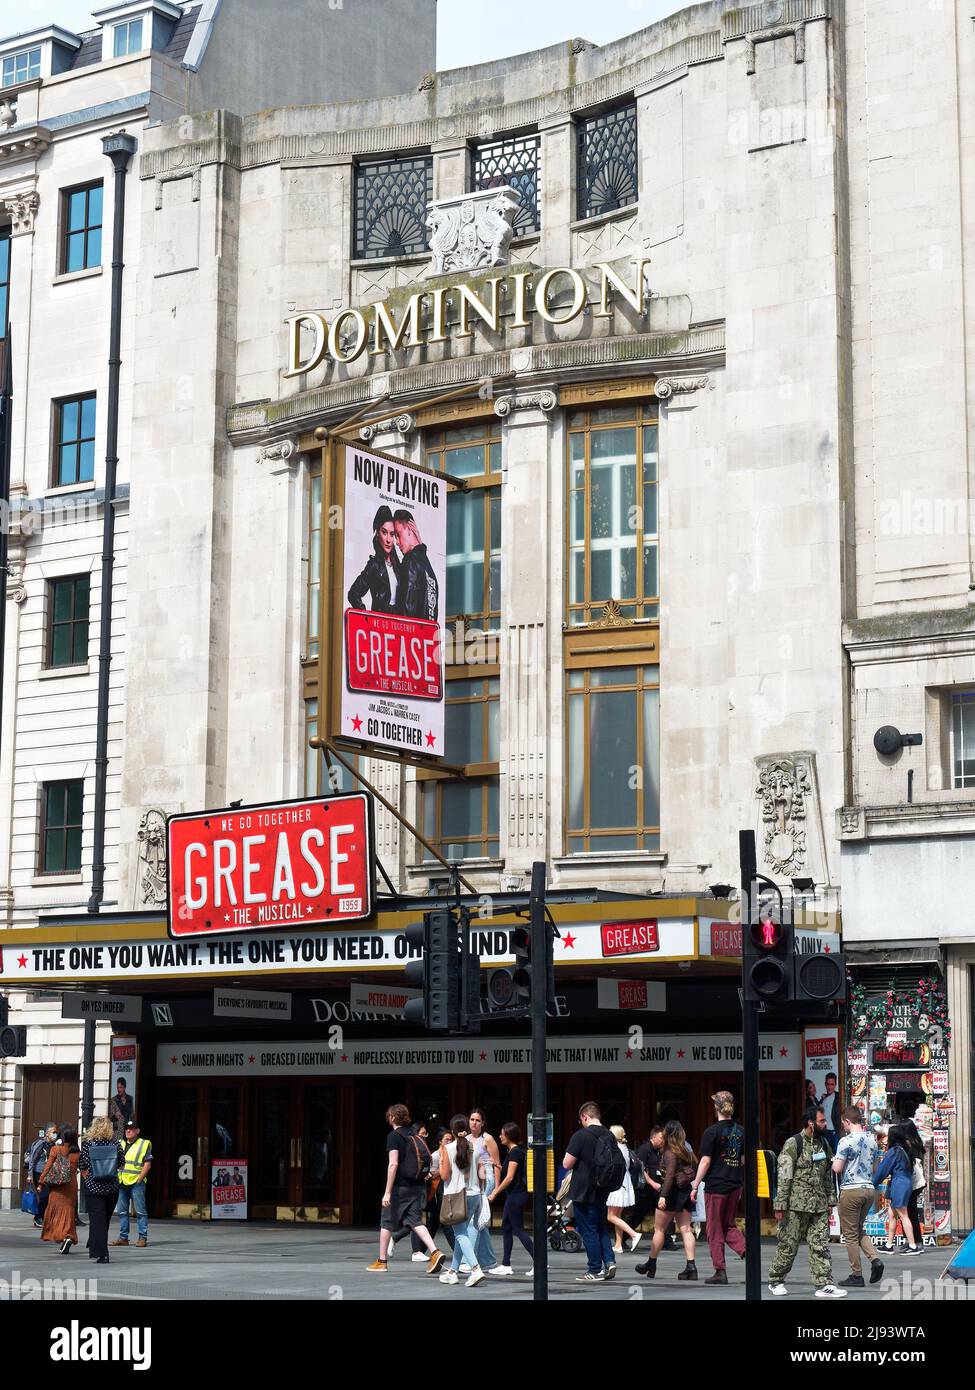 Front view of the Dominion Theatre in London Stock Photo